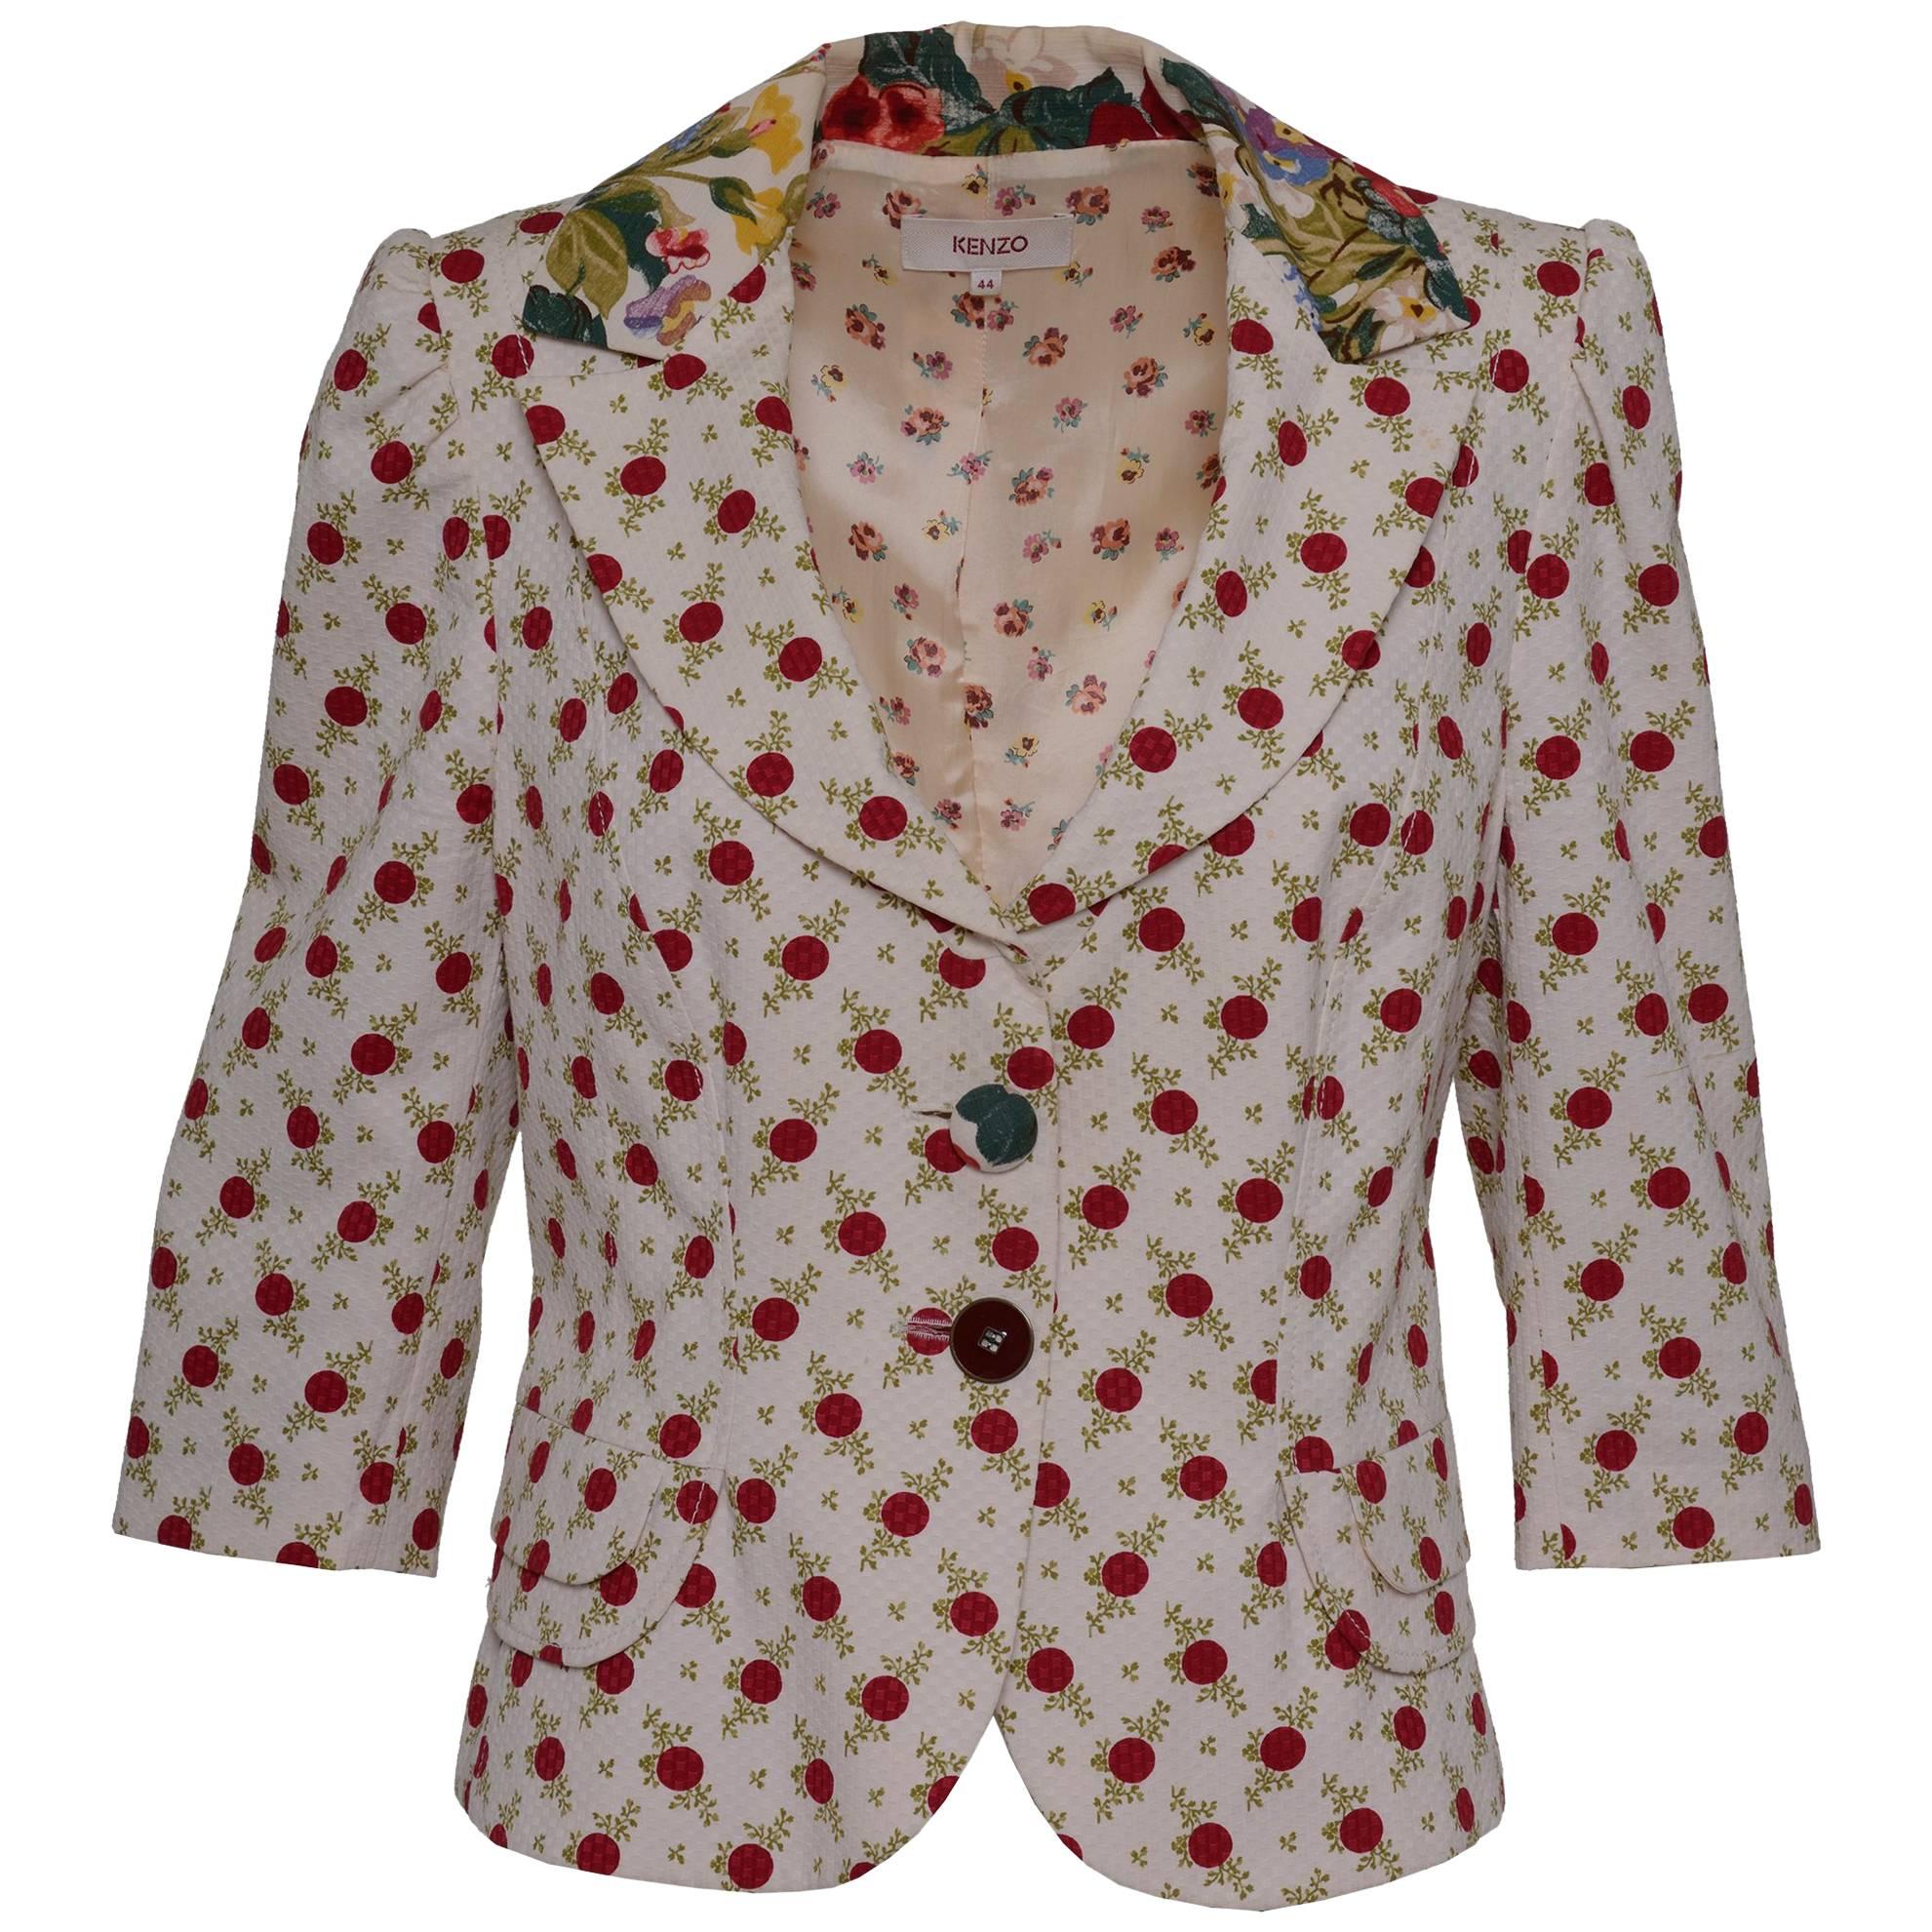 1990s Kenzo White Suit Jacket with Floral and Polka Dot Print